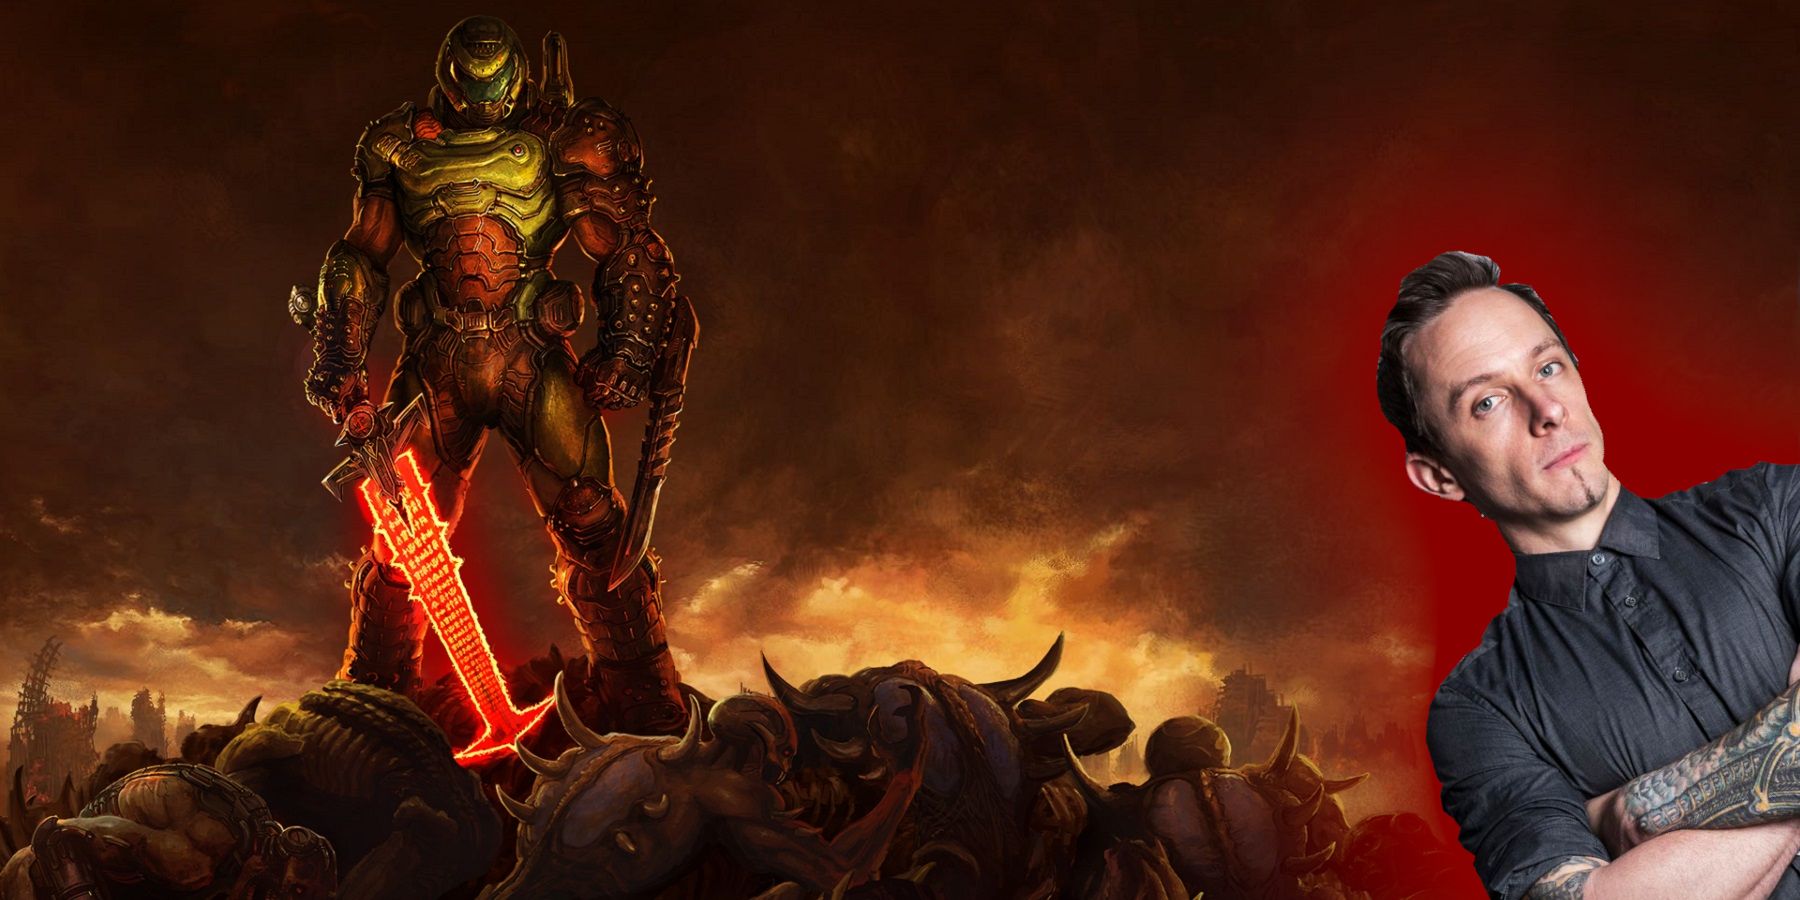 Artwork from Doom Eternal showing Doom Guy on top of a pile of bodies while holding the Crucible, wth Mick Gordon off to the side.